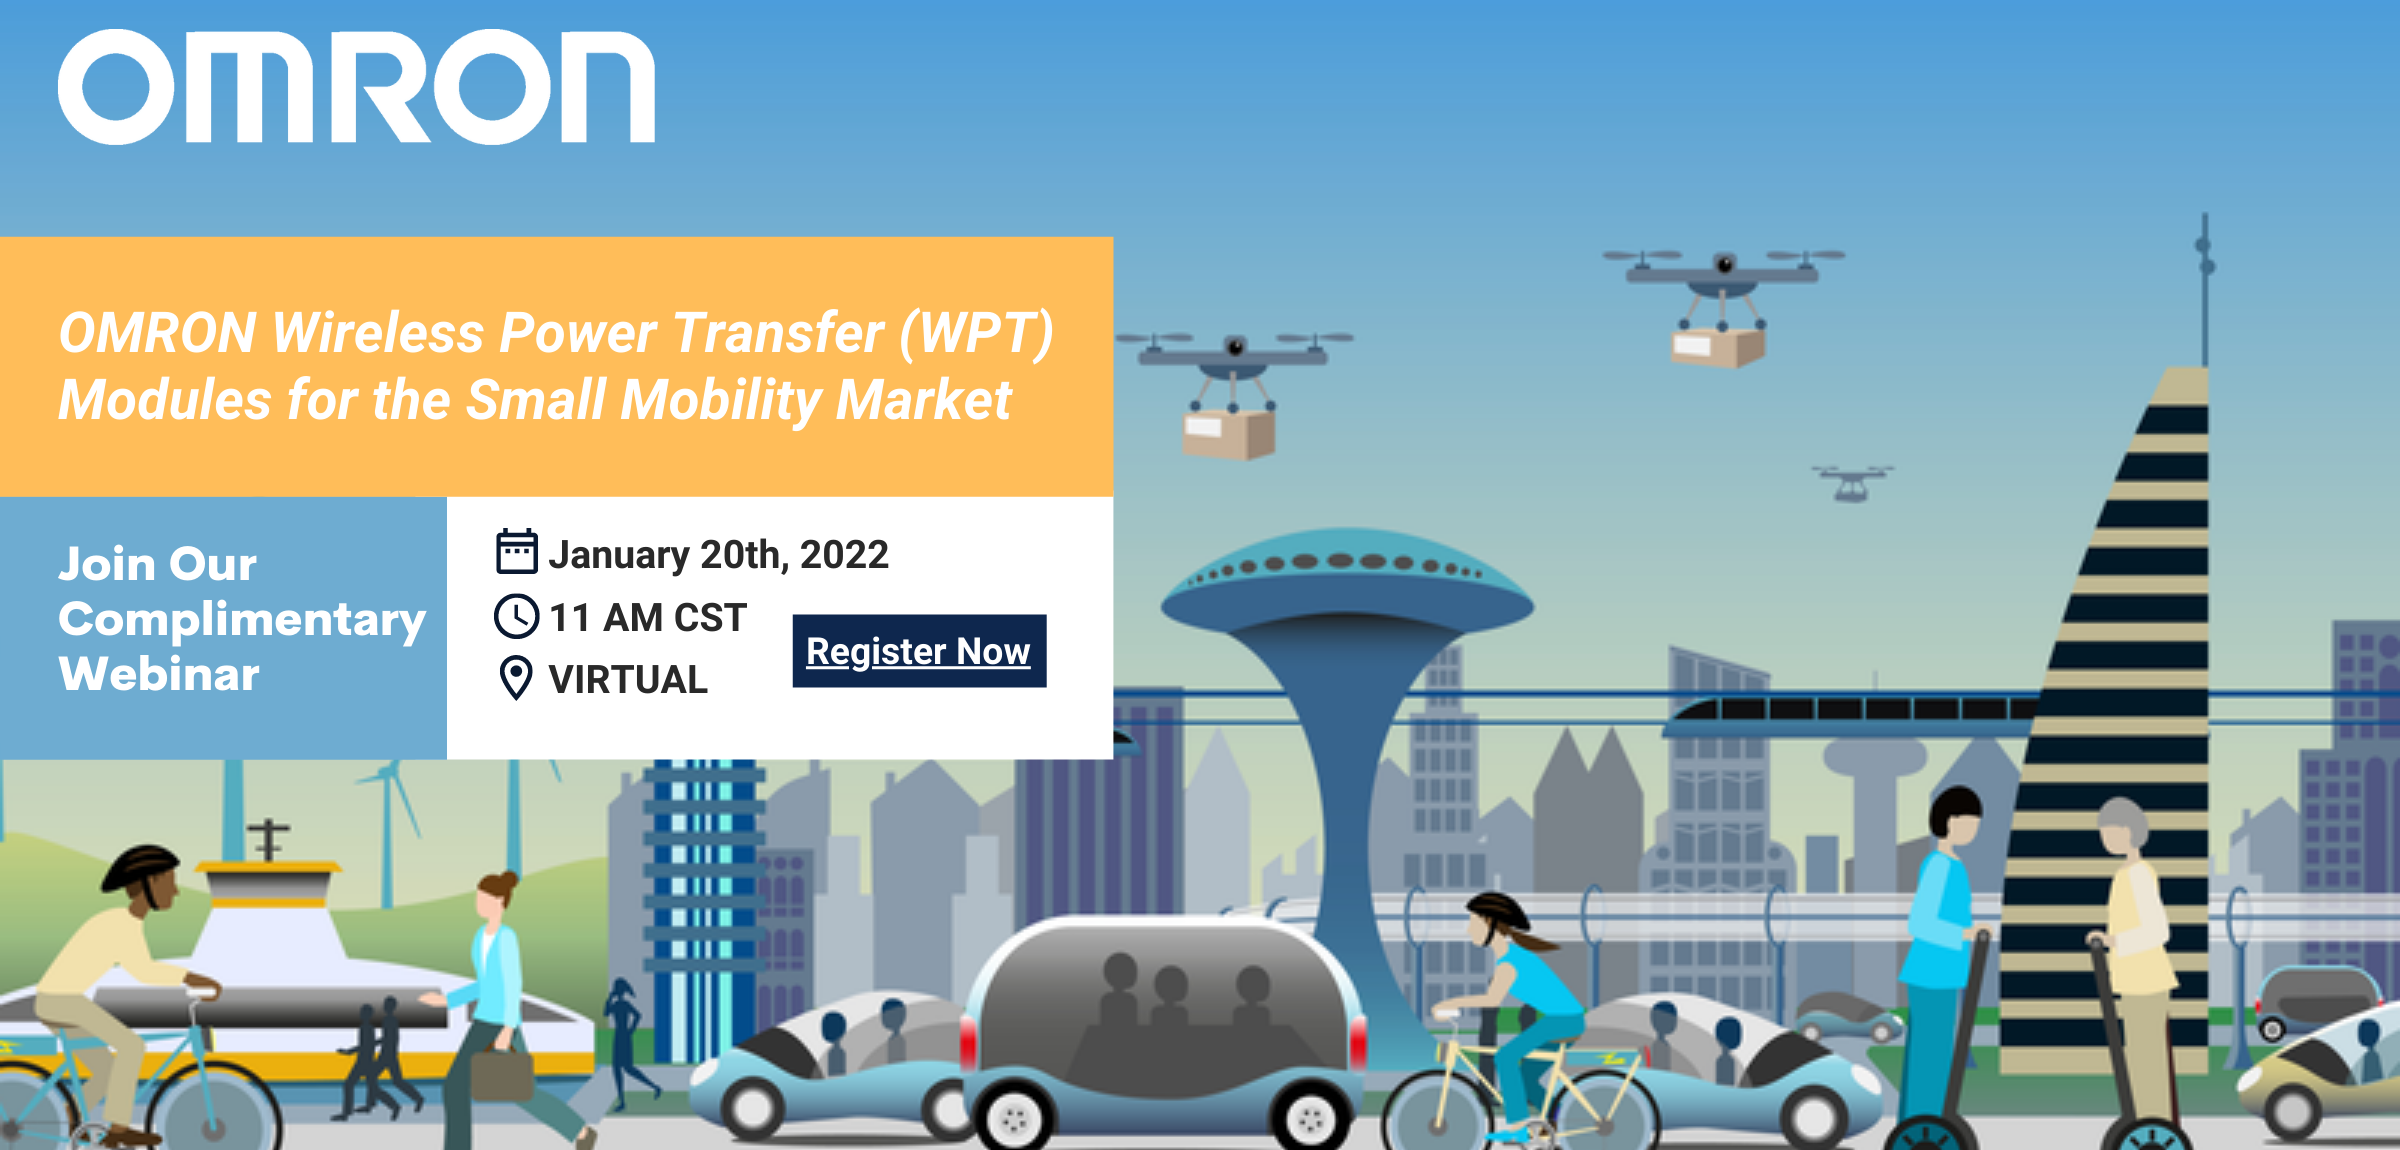 OMRON Wireless Power Transfer (WPT) Modules for the Small Mobility Market.